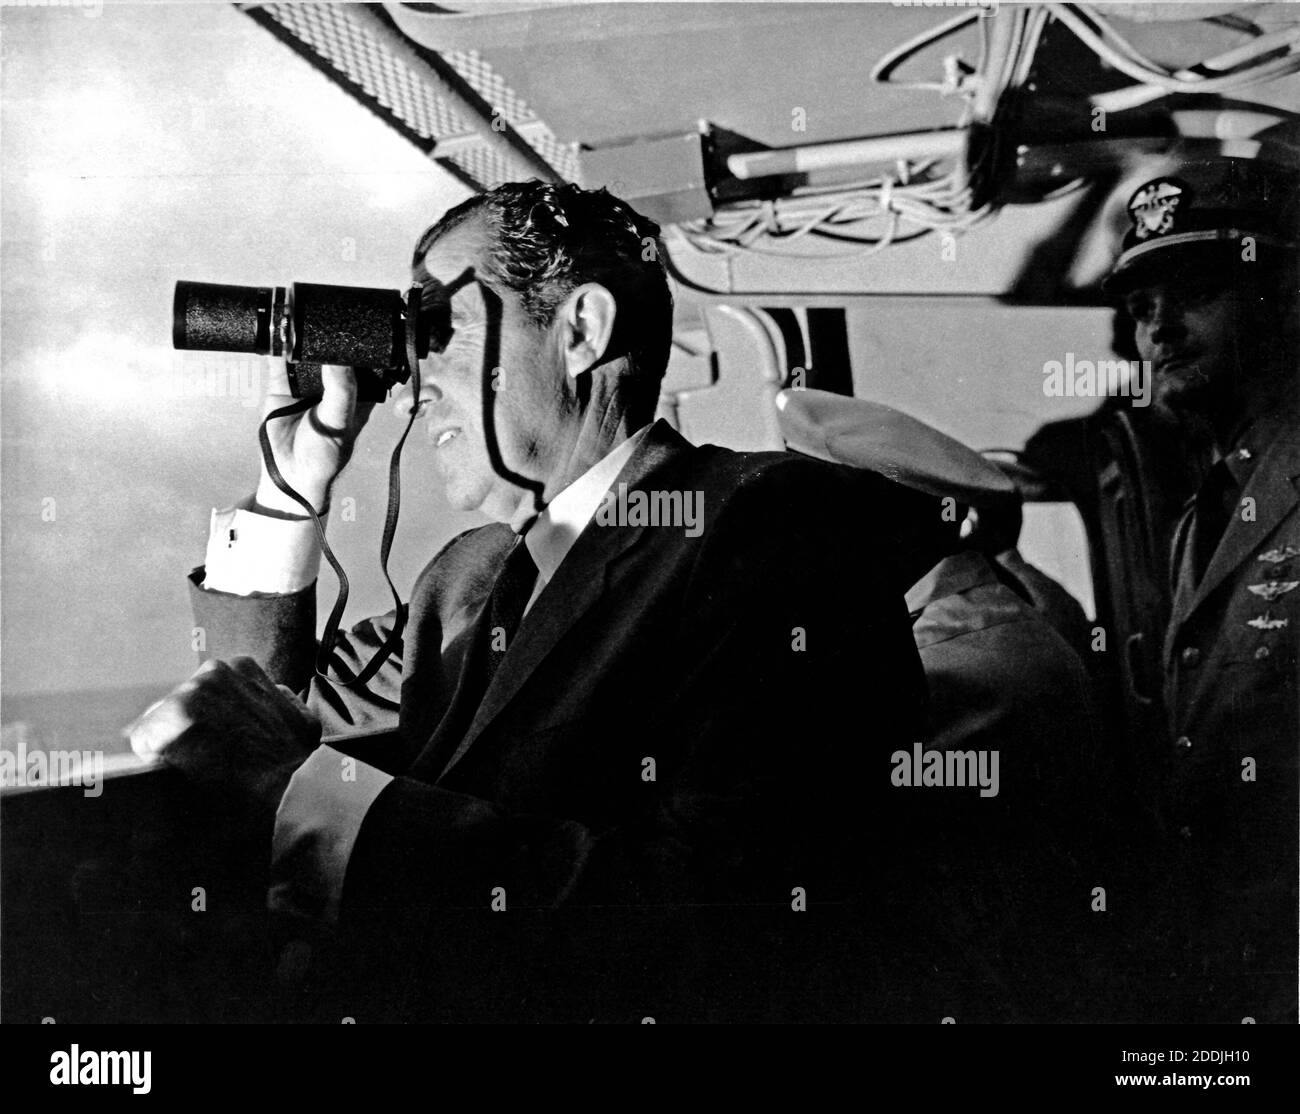 Aboard the USS Hornet - (FILE) -- United States President Richad M. Nixon follows Apollo 11 recovery activities with binoculars aboard the USS Hornet, located 13 miles (20.9215 km) from the spacecraft's splashdown point. The President led the nation in greeting astronauts Neil A. Armstrong, Michael Collins, and Edwin E. Aldrin, Jr., at the successful completion of their historic lunar landing mission on July 24, 1969. Their spacecraft splashed down 900 miles (1448.41 km) southwest of Hawaii at 12:50 p.m. EDT July 24, 1969 eight days after the space pilots were launched by a Saturn V space vehi Stock Photo